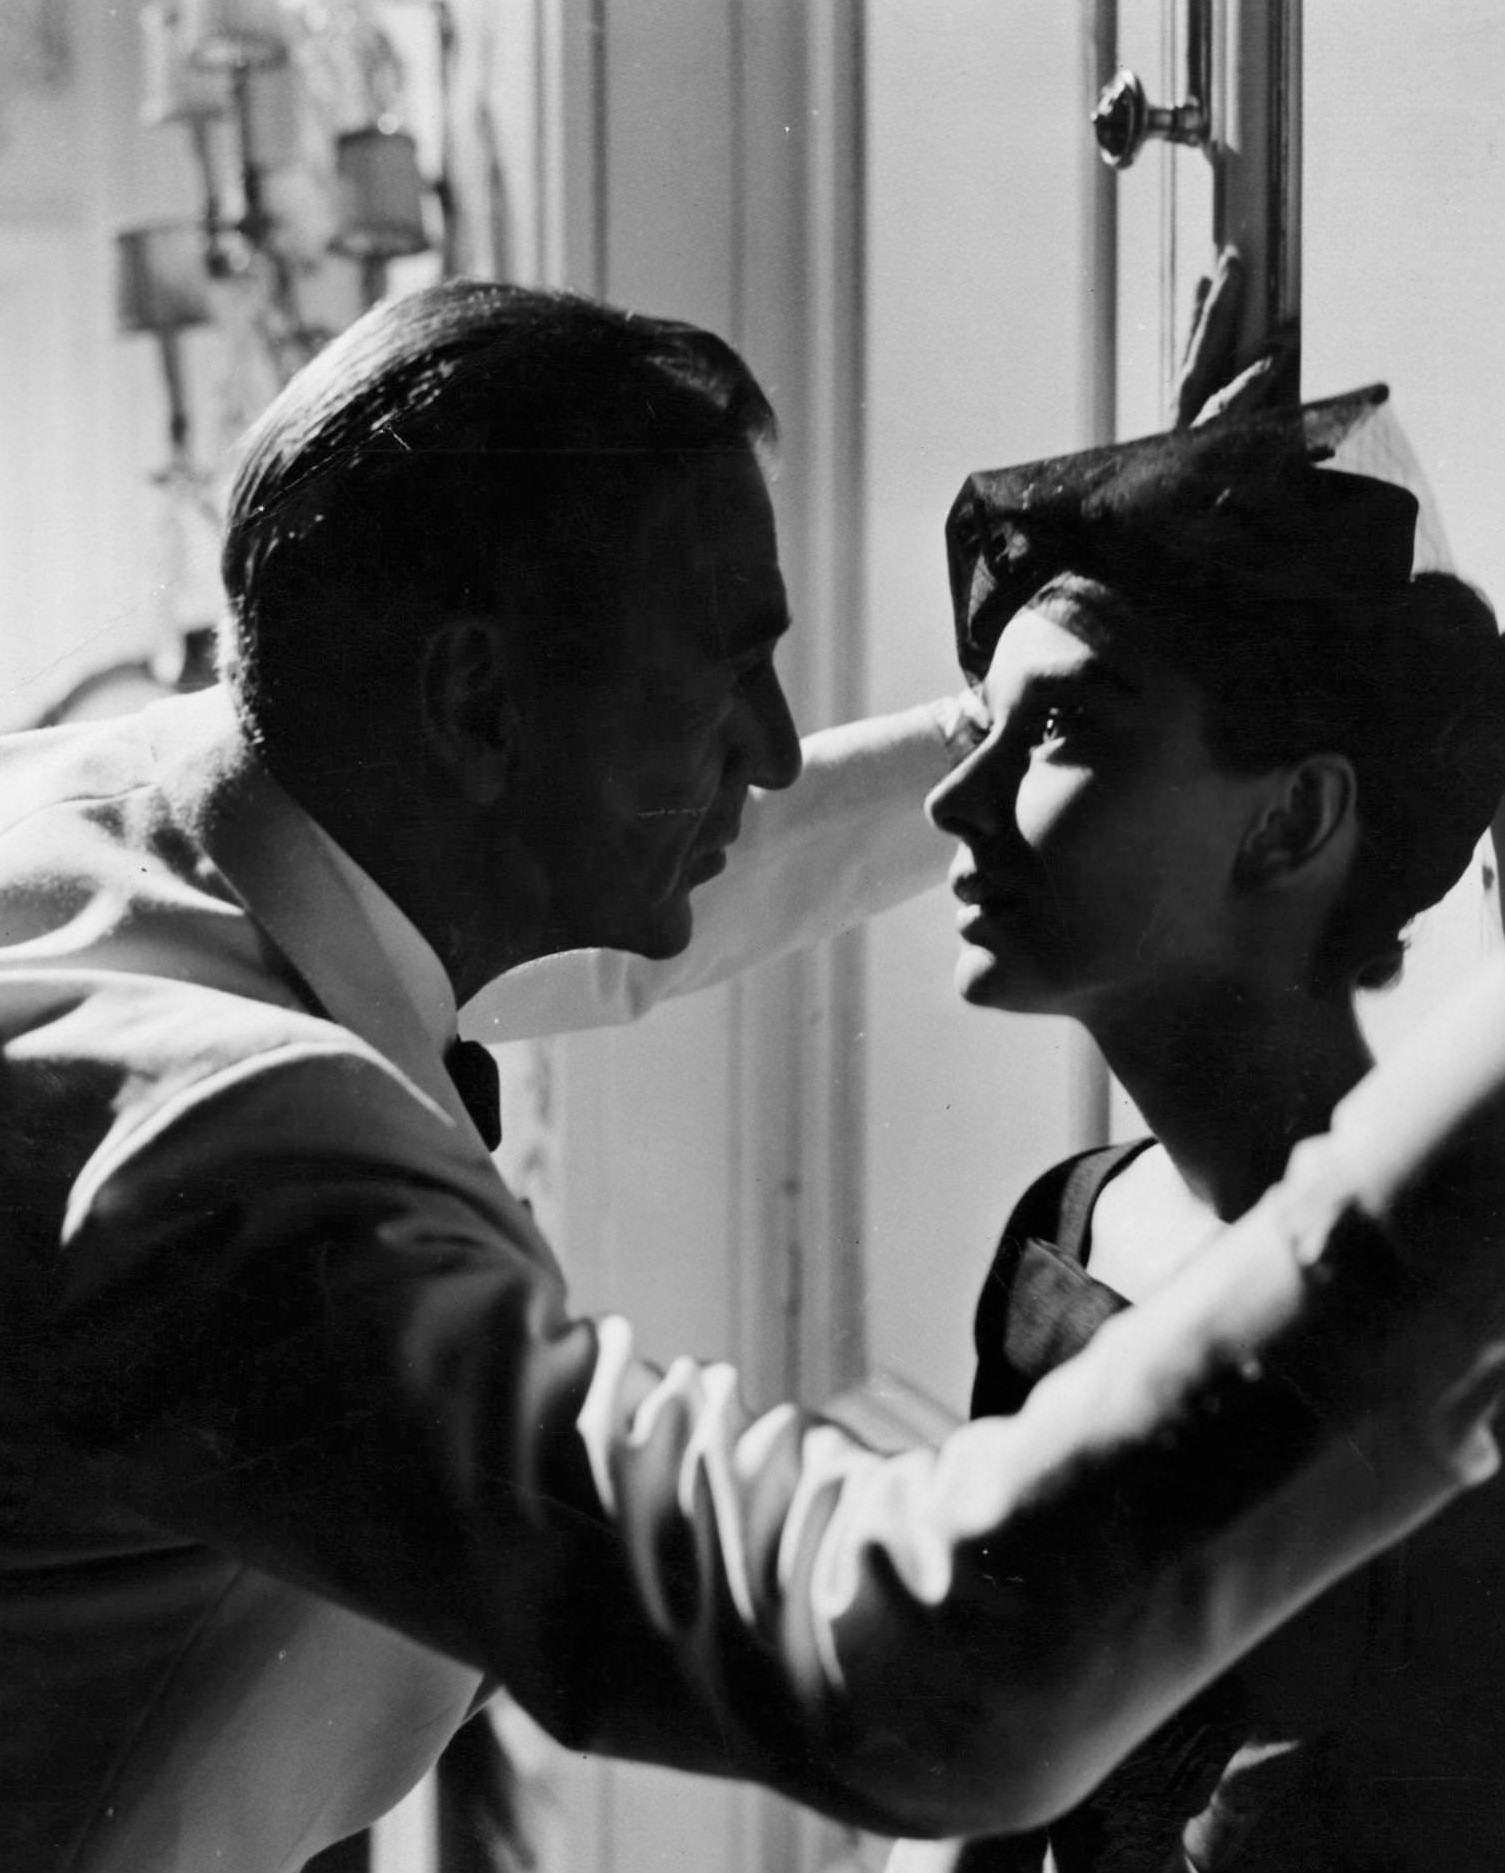 Gary Cooper faces Audrey Hepburn in a scene from the film 'Love In The Afternoon', 1957.